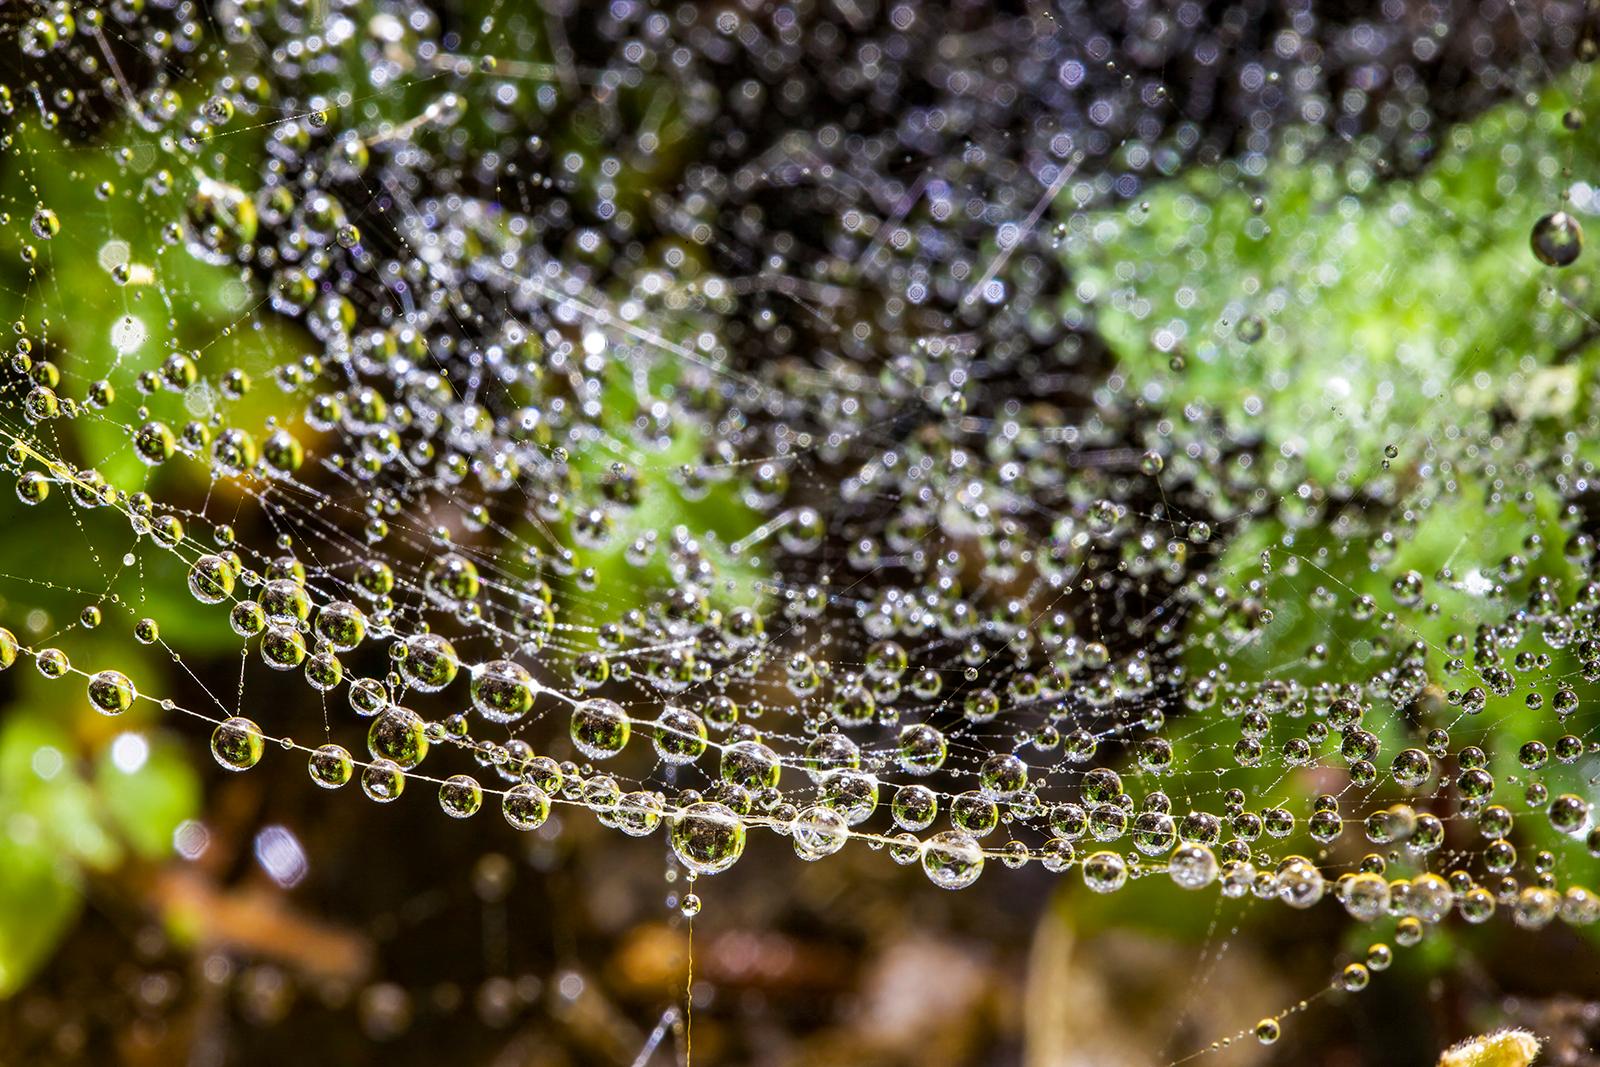 Droplets 1  - Limited edition pigment print  -   Limited Editions of 5
Close-up of dewdrops on a spider's web.
Signed + numbered by artist with certificate of authenticity. 

Archival pigment print available sizes ( Image size , the white margin is